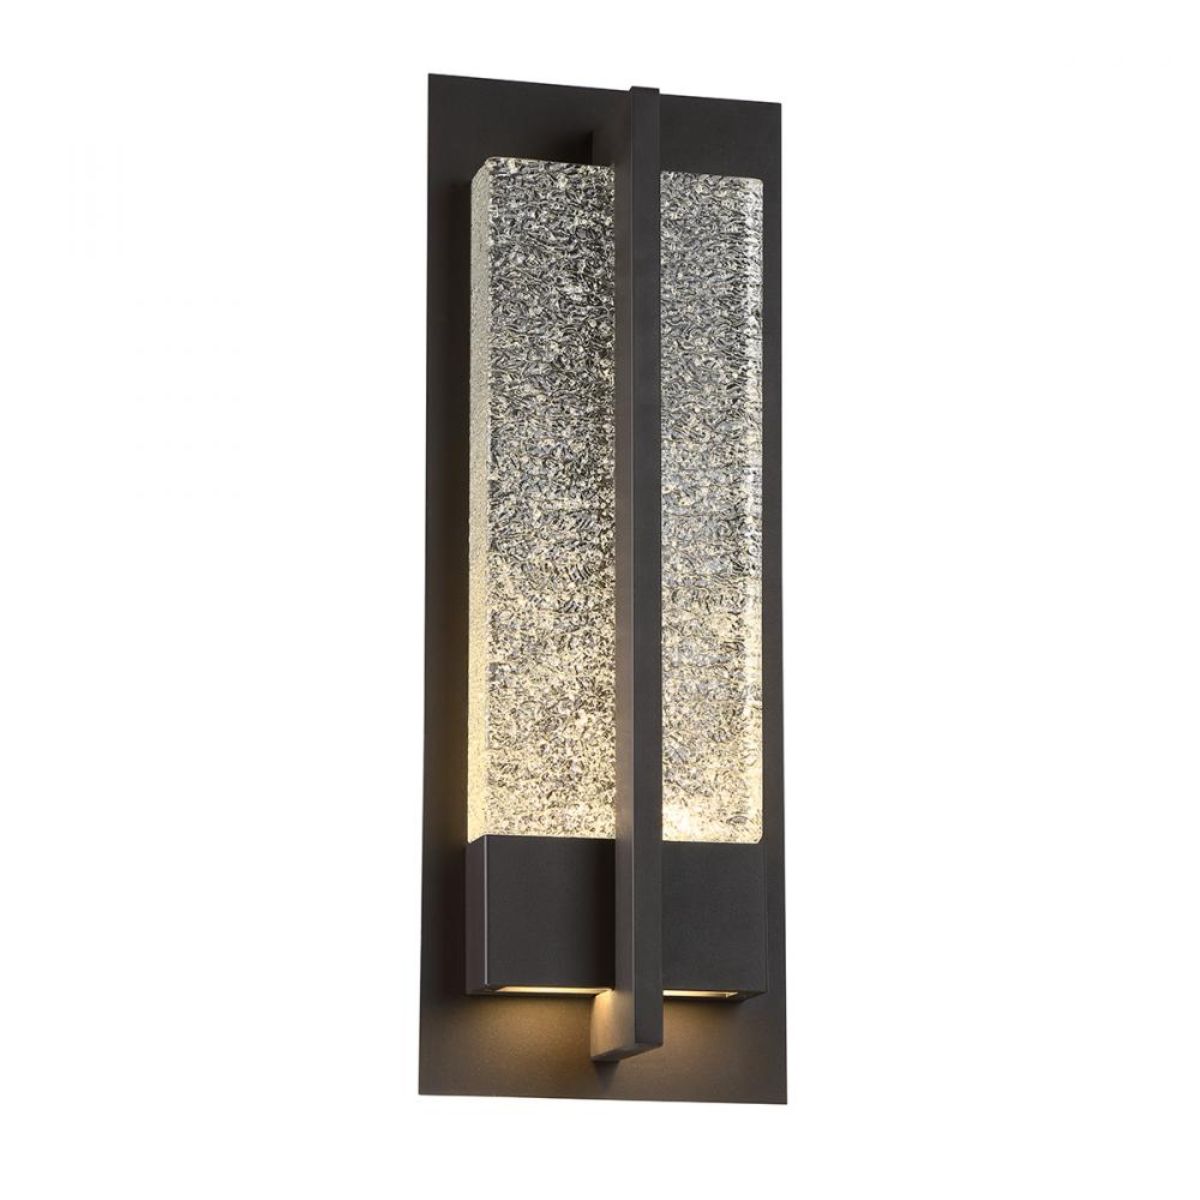 Omni 20 In. LED Outdoor Wall Sconce 150 lumens Bronze Finish